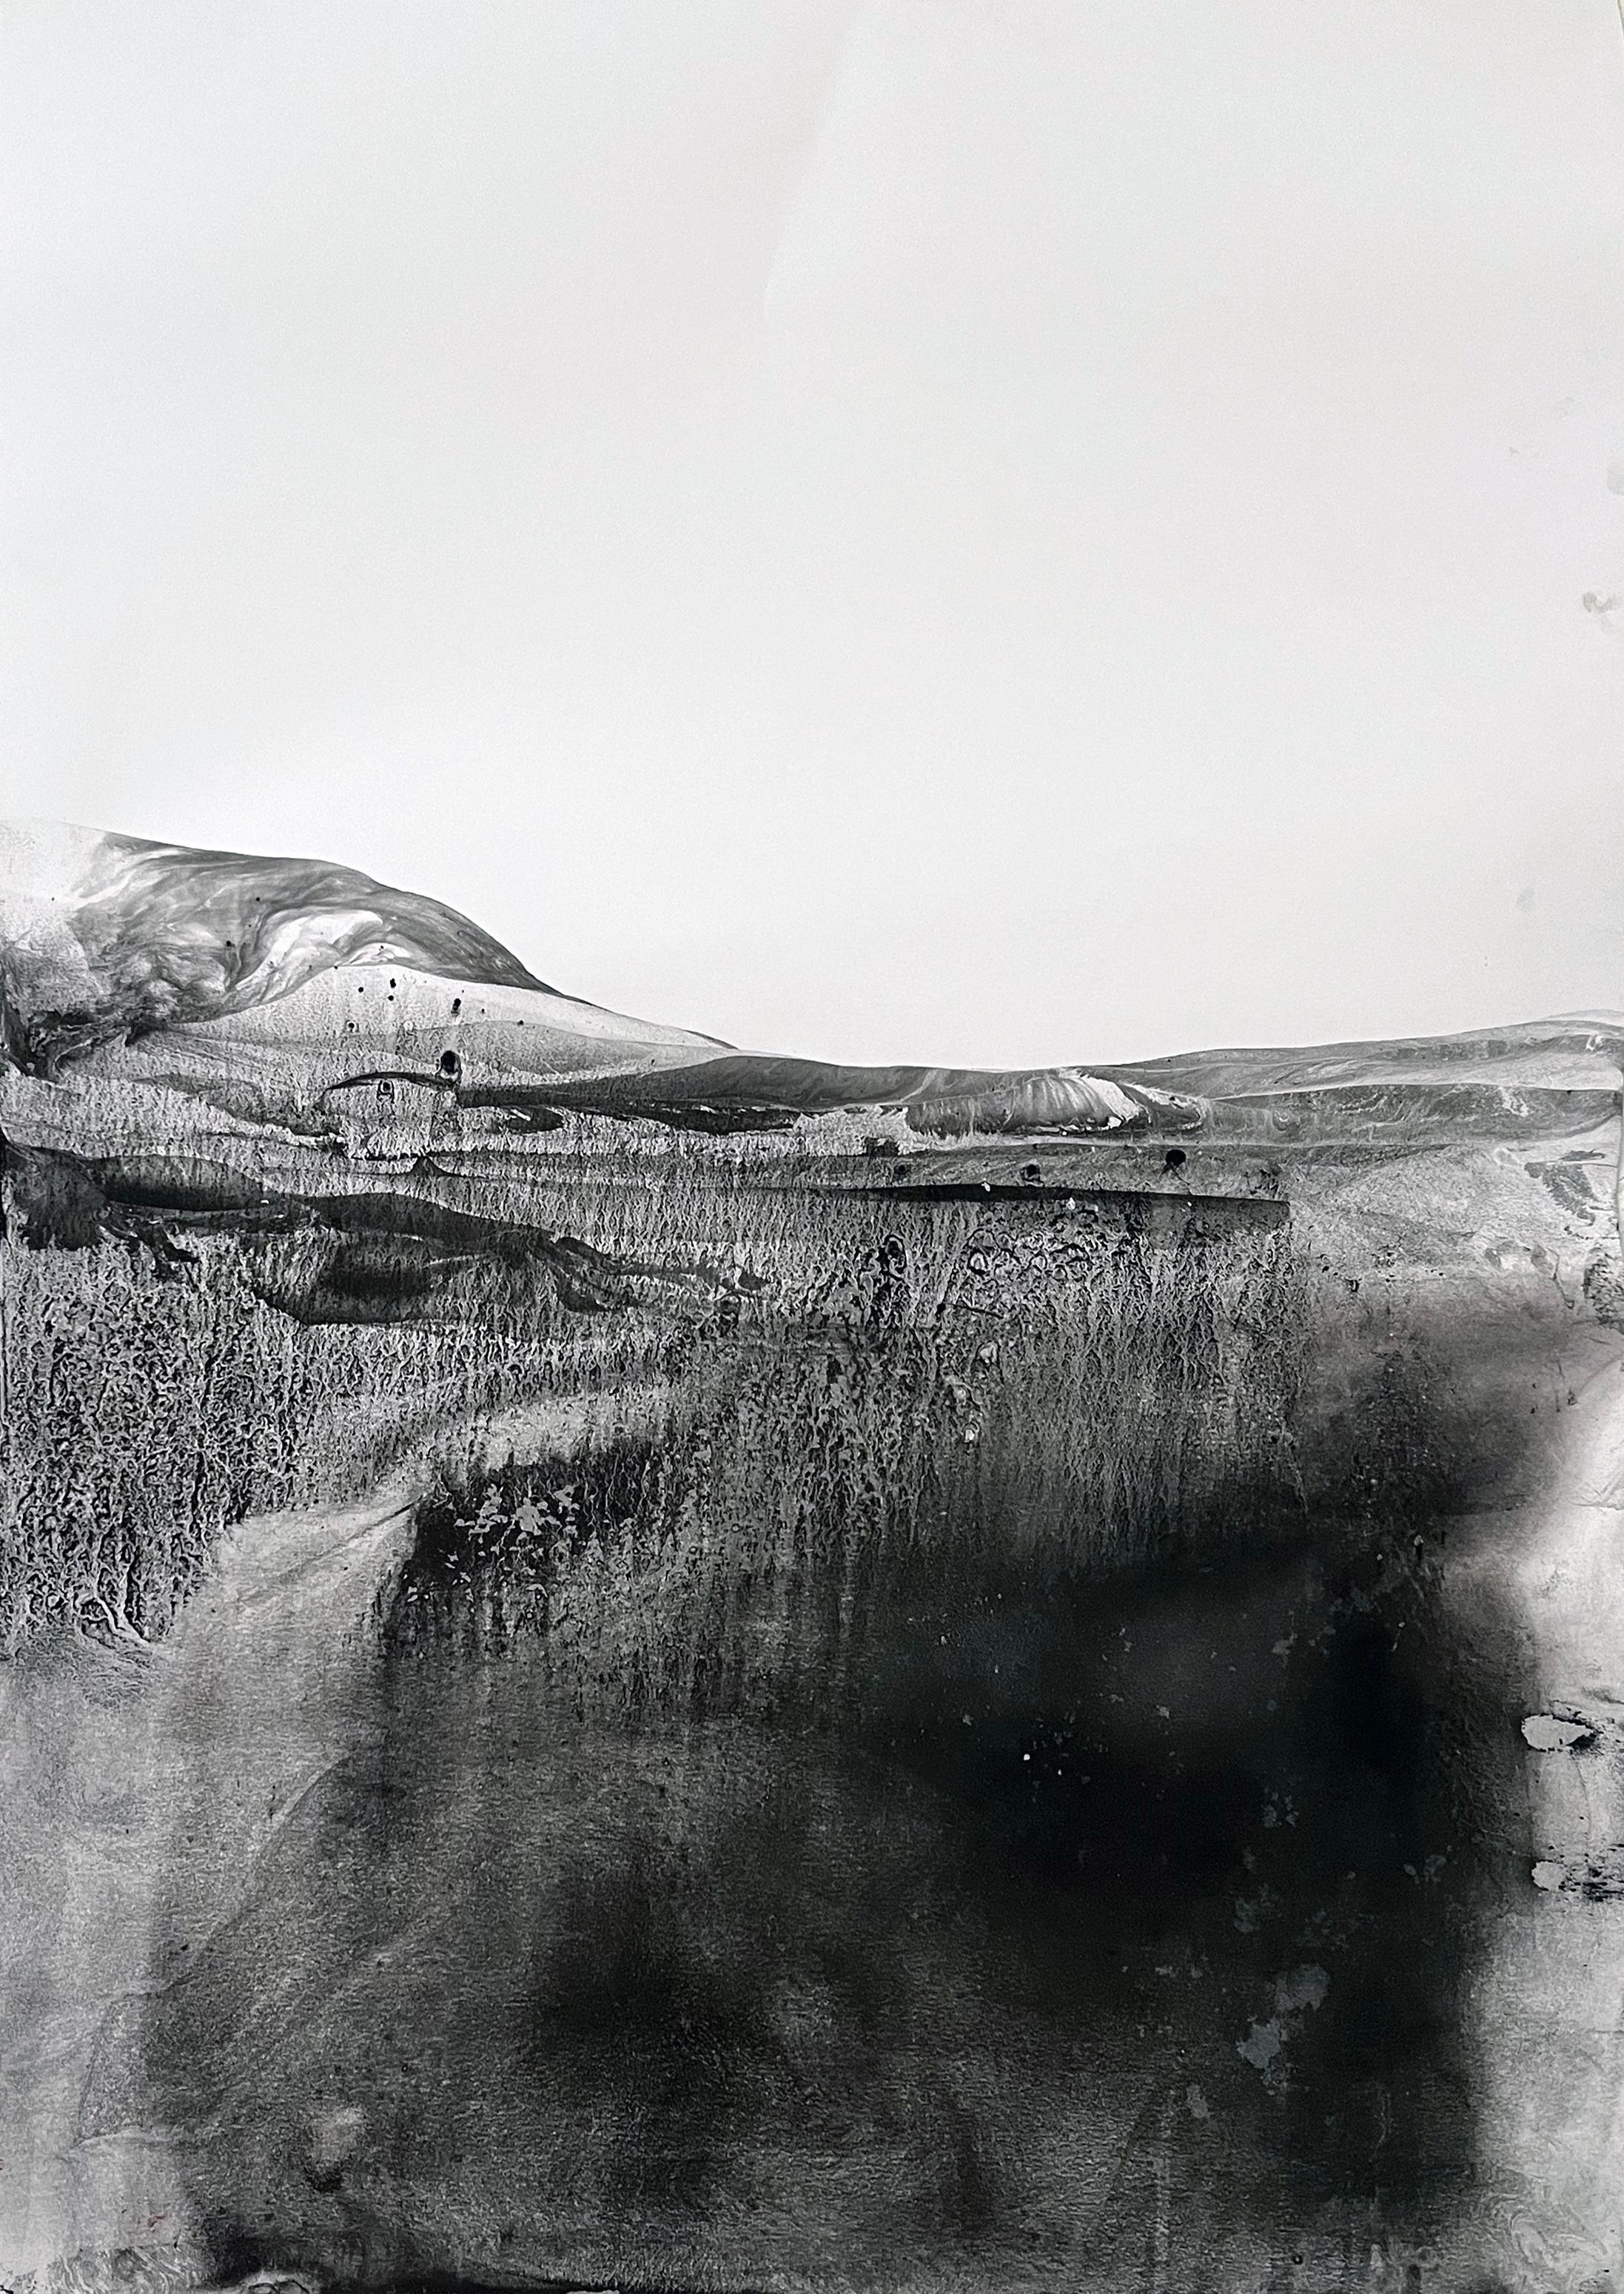 Landscape B/W
Mineral oxide on paper (300gr)
Minimalism- Original art
70 x100 cm

Original Created:2022
Subjects:Landscape
Materials:Paper
Styles:Abstract Abstract Expressionism Impressionism Modern Minimalism 
Mediums:Charcoal